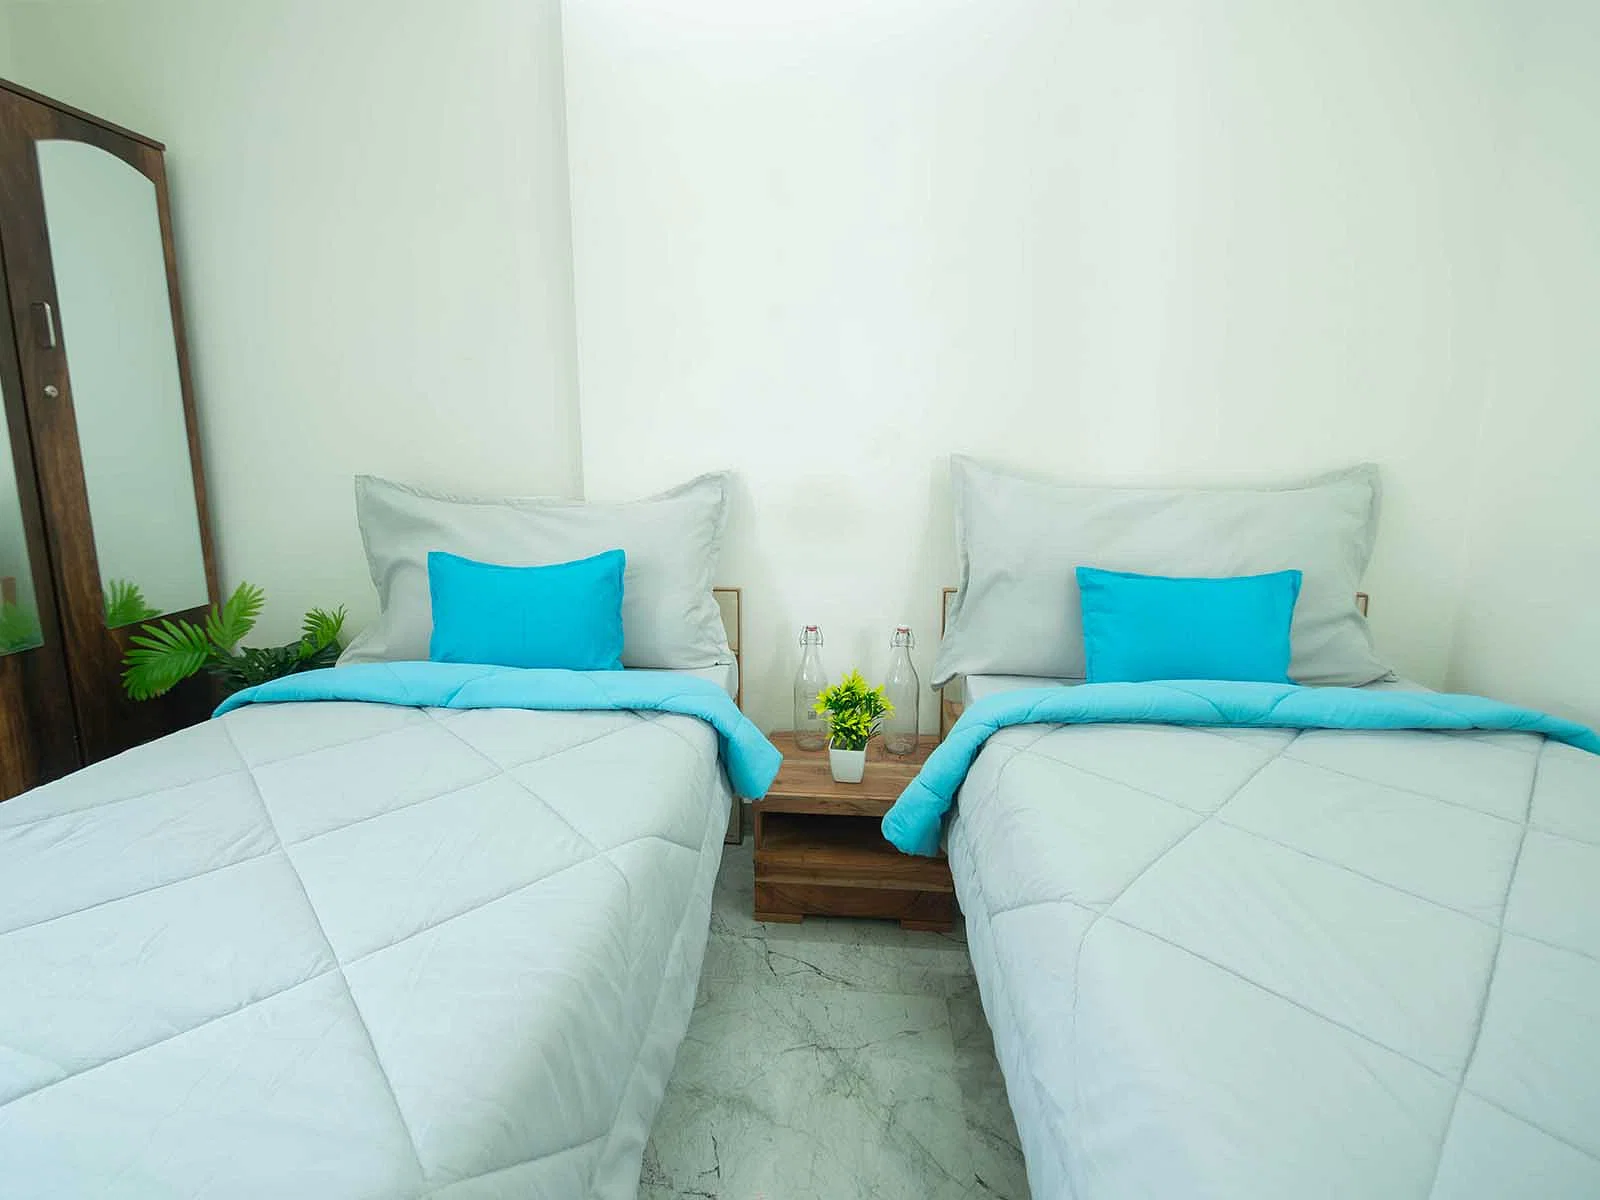 fully furnished Zolo single rooms for rent near me-check out now-Zolo Abode